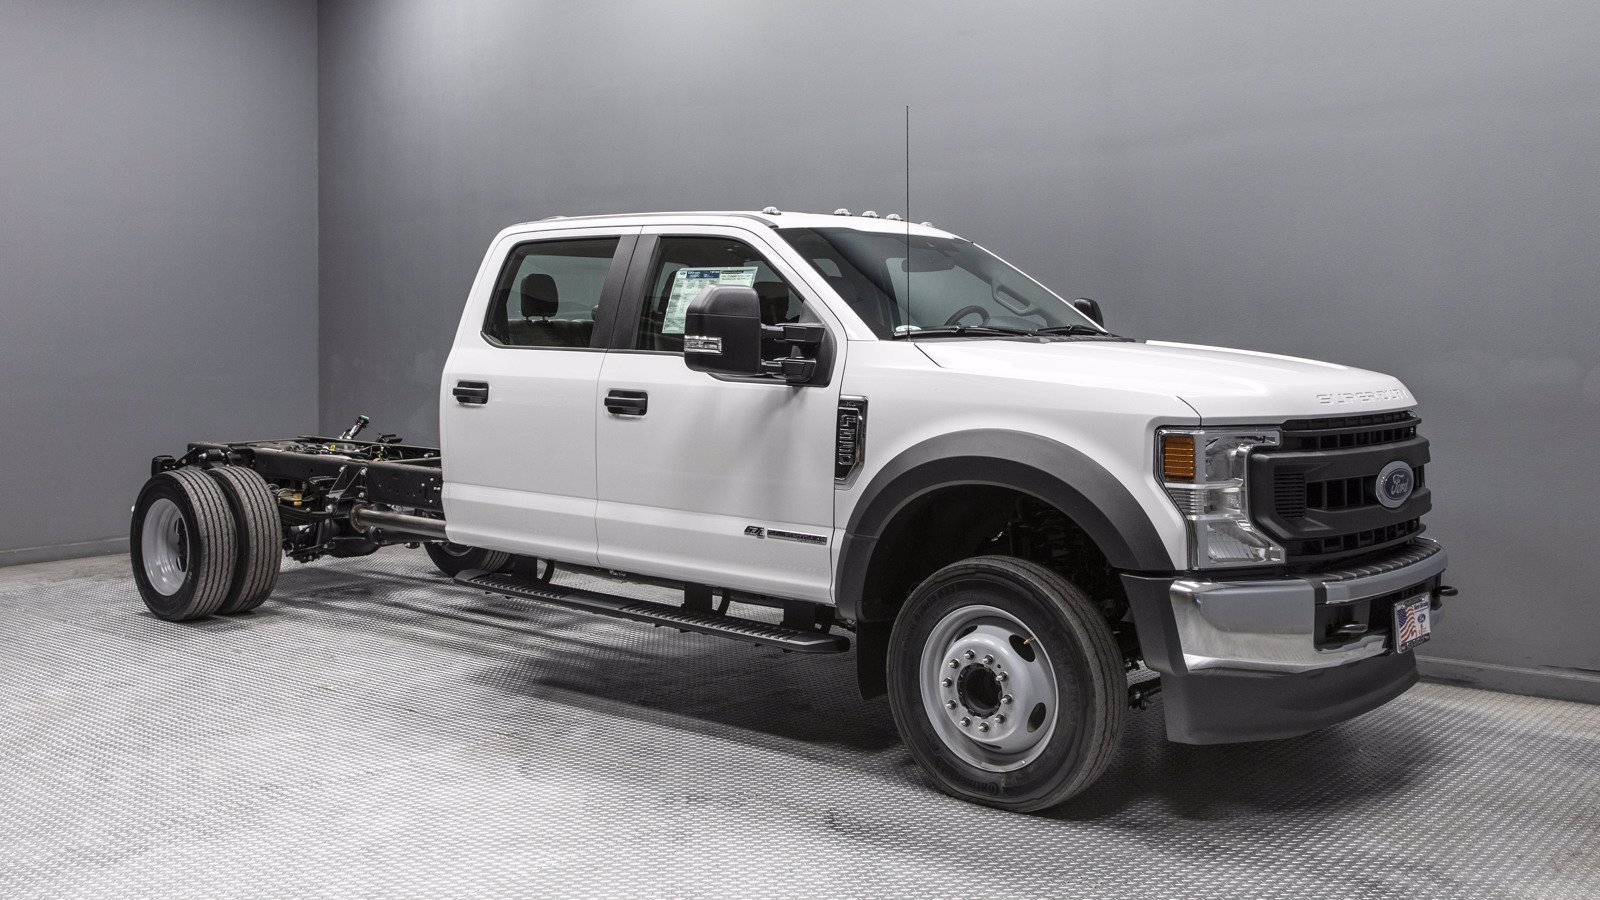 New 2020 Ford Super Duty F-550 DRW XL Crew Cab Chassis-Cab in Redlands